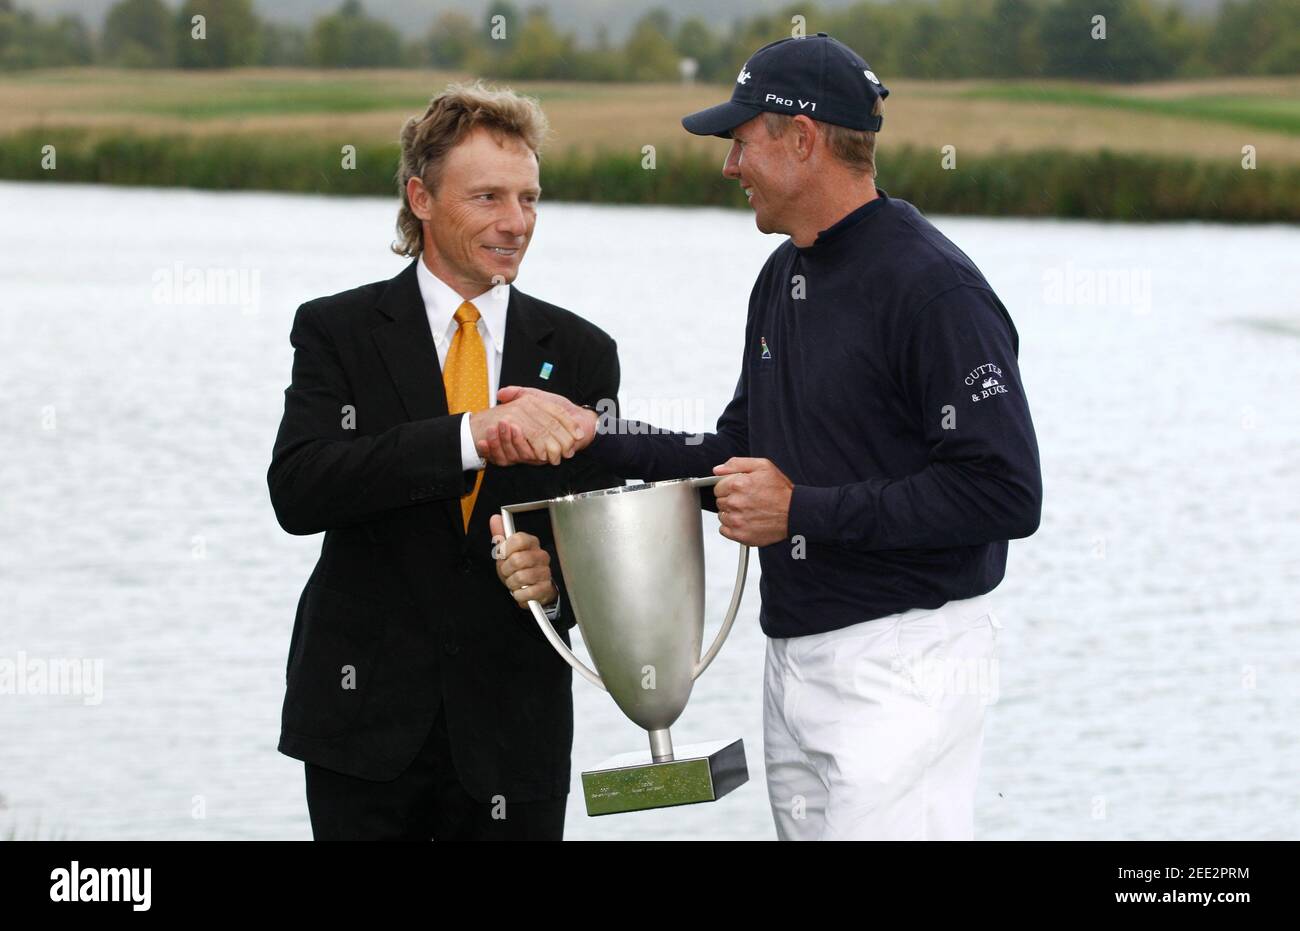 Golf - Mercedes-Benz Championship - Golf Club Gut Larchenhof - Cologne -  Germany - 13/9/09 Anders Hansen - Denmark celebrates victory with trophy  with Bernhard Langer - Germany Mandatory Credit: Action Images / Paul  Harding Stock Photo - Alamy